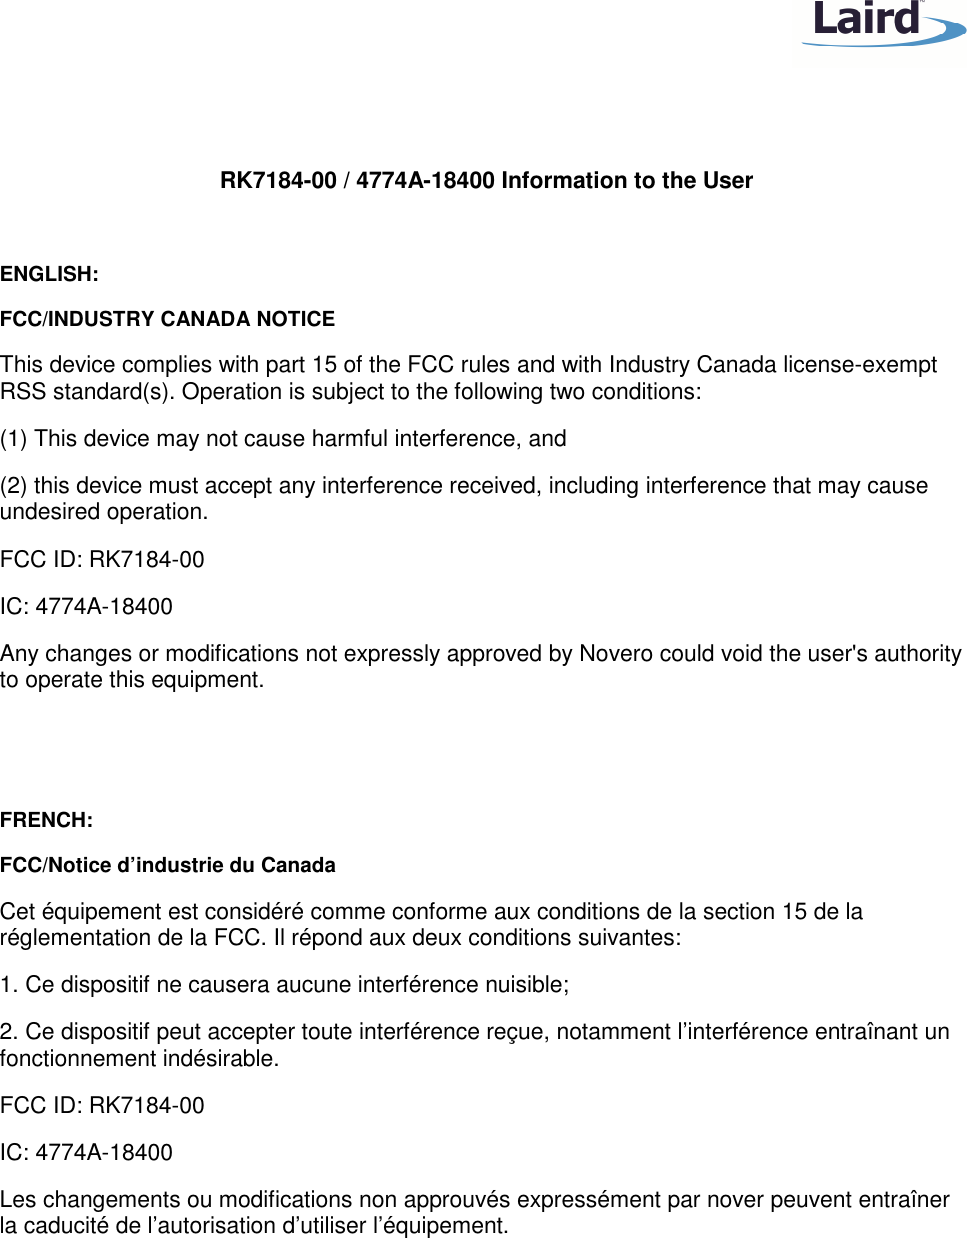    RK7184-00 / 4774A-18400 Information to the User  ENGLISH: FCC/INDUSTRY CANADA NOTICE This device complies with part 15 of the FCC rules and with Industry Canada license-exempt RSS standard(s). Operation is subject to the following two conditions: (1) This device may not cause harmful interference, and (2) this device must accept any interference received, including interference that may cause undesired operation. FCC ID: RK7184-00 IC: 4774A-18400 Any changes or modifications not expressly approved by Novero could void the user&apos;s authority to operate this equipment.   FRENCH: FCC/Notice d’industrie du Canada Cet équipement est considéré comme conforme aux conditions de la section 15 de la réglementation de la FCC. Il répond aux deux conditions suivantes: 1. Ce dispositif ne causera aucune interférence nuisible; 2. Ce dispositif peut accepter toute interférence reçue, notamment l’interférence entraînant un fonctionnement indésirable. FCC ID: RK7184-00 IC: 4774A-18400 Les changements ou modifications non approuvés expressément par nover peuvent entraîner la caducité de l’autorisation d’utiliser l’équipement.  